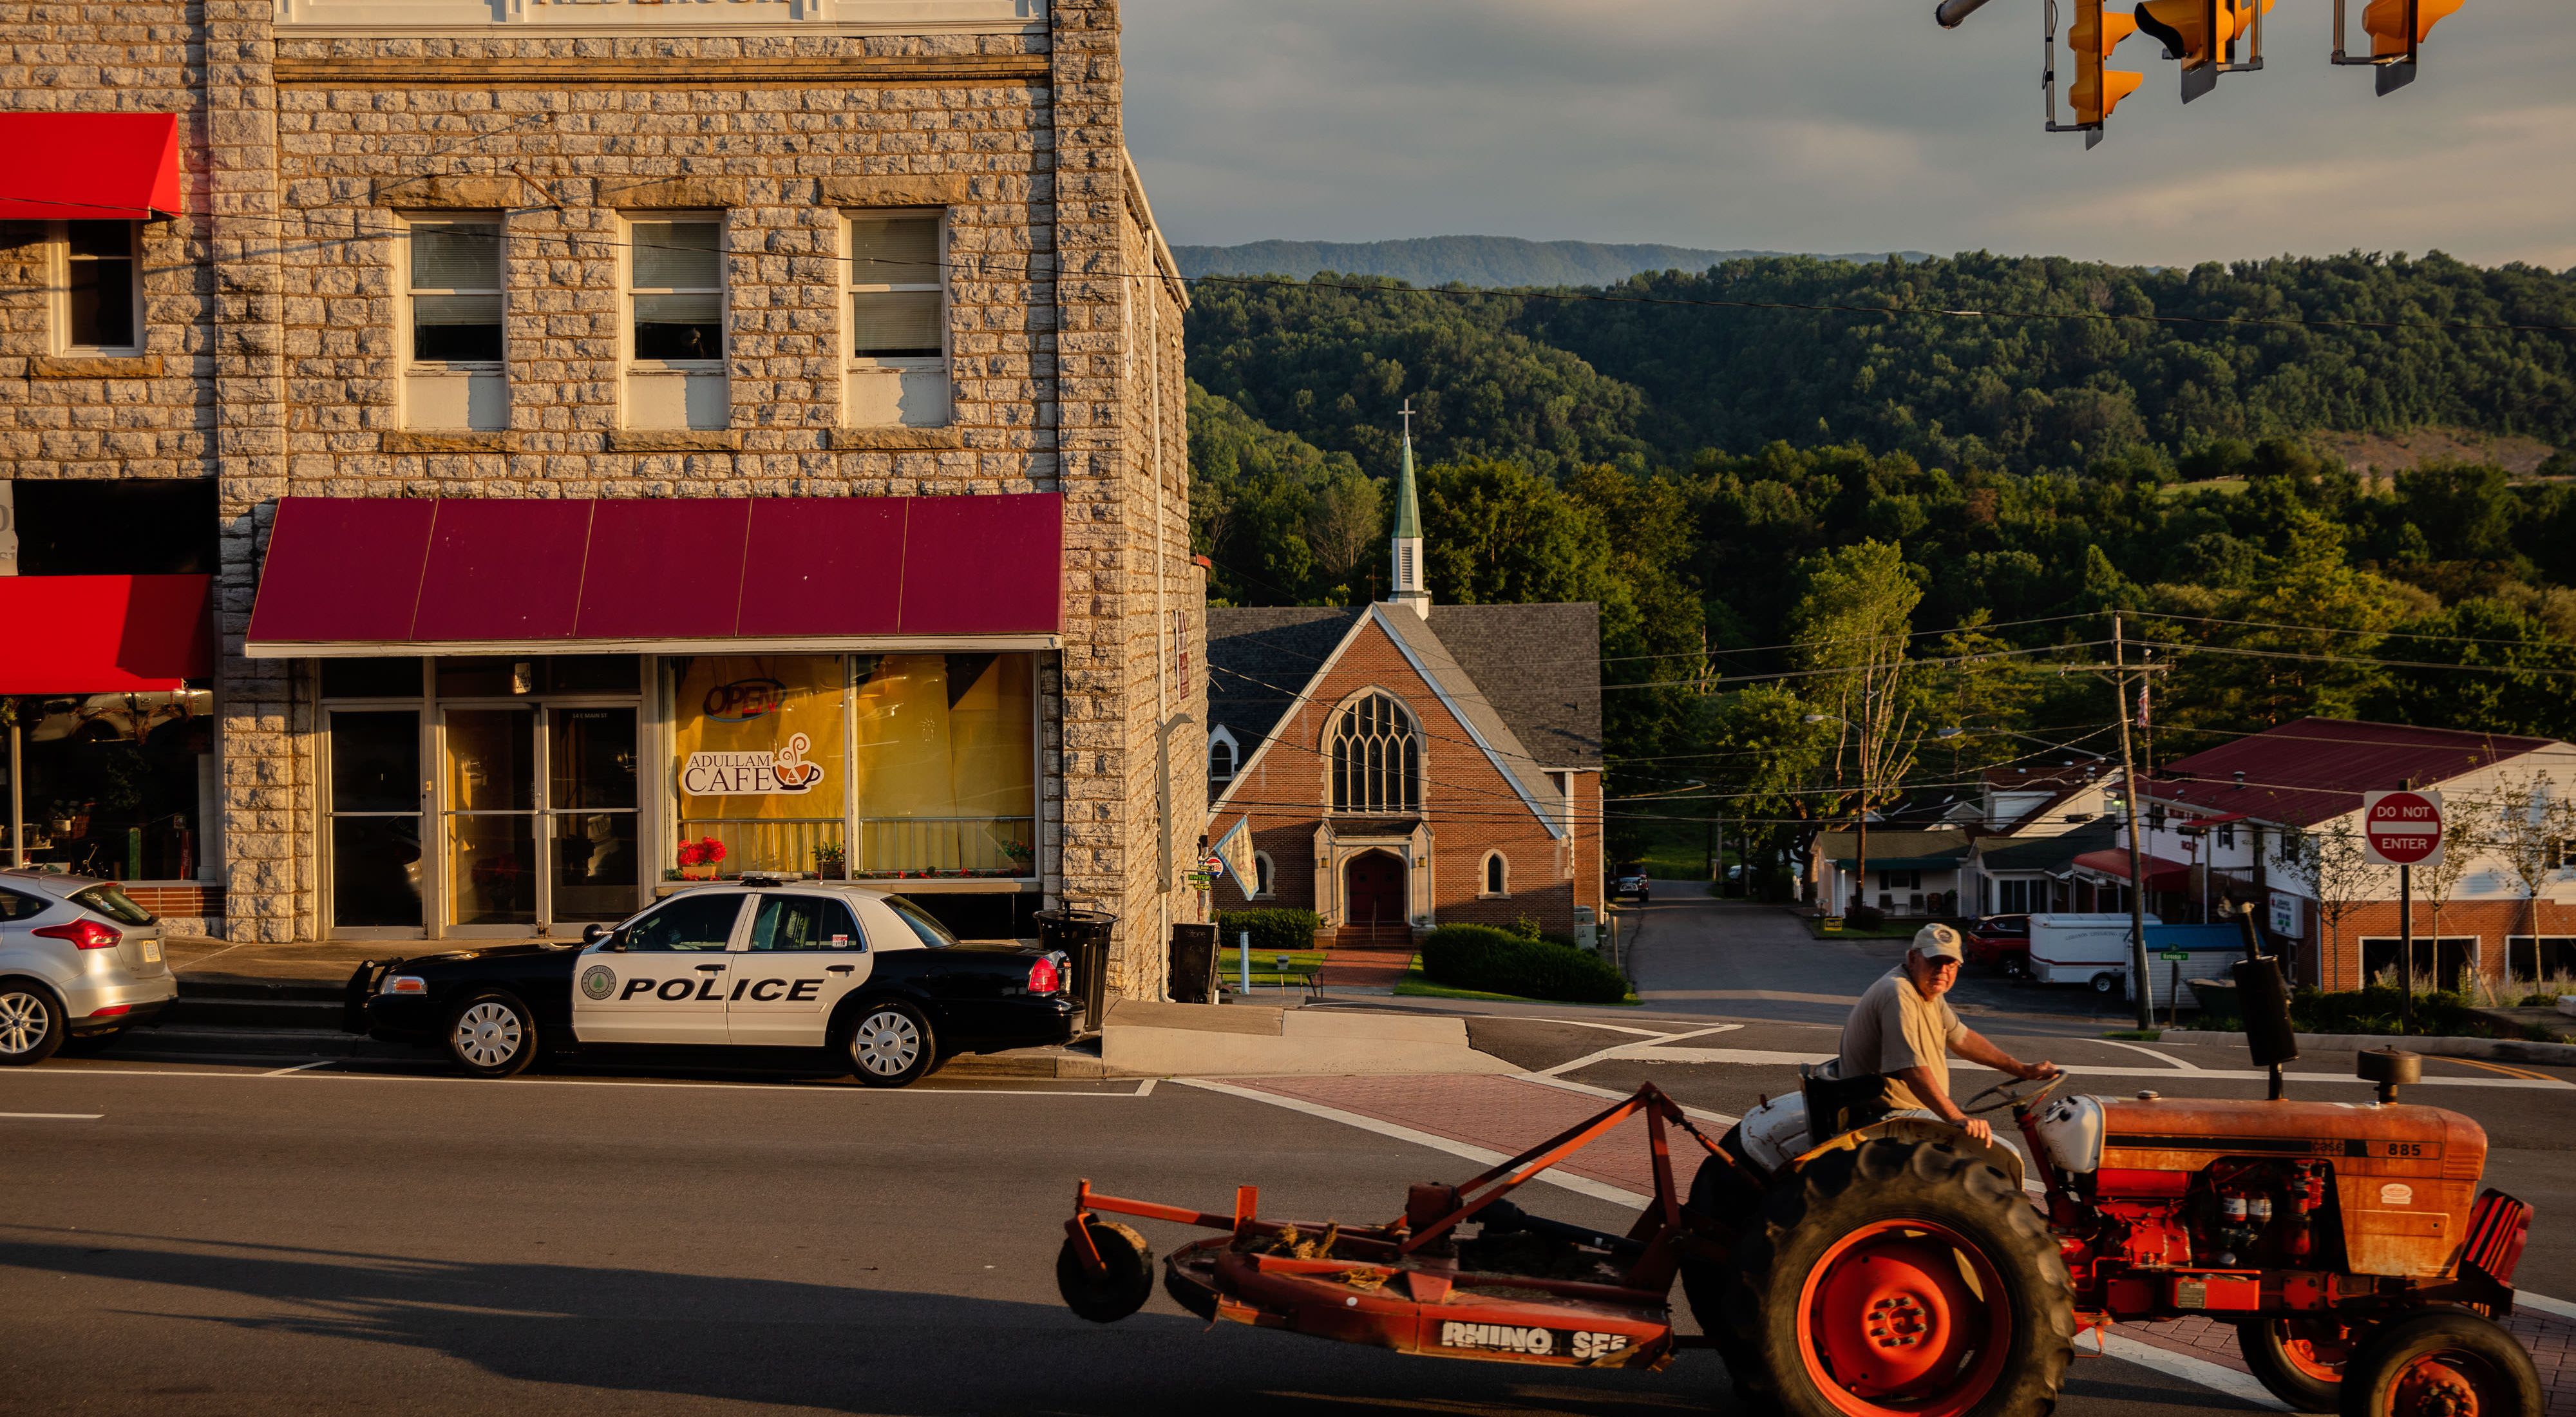 Street scene in St. Paul, VA. A red tractor drives past stone clad storefront. A police car is parked on the street. A church and other buildings are visible with a tall mountain in the background.